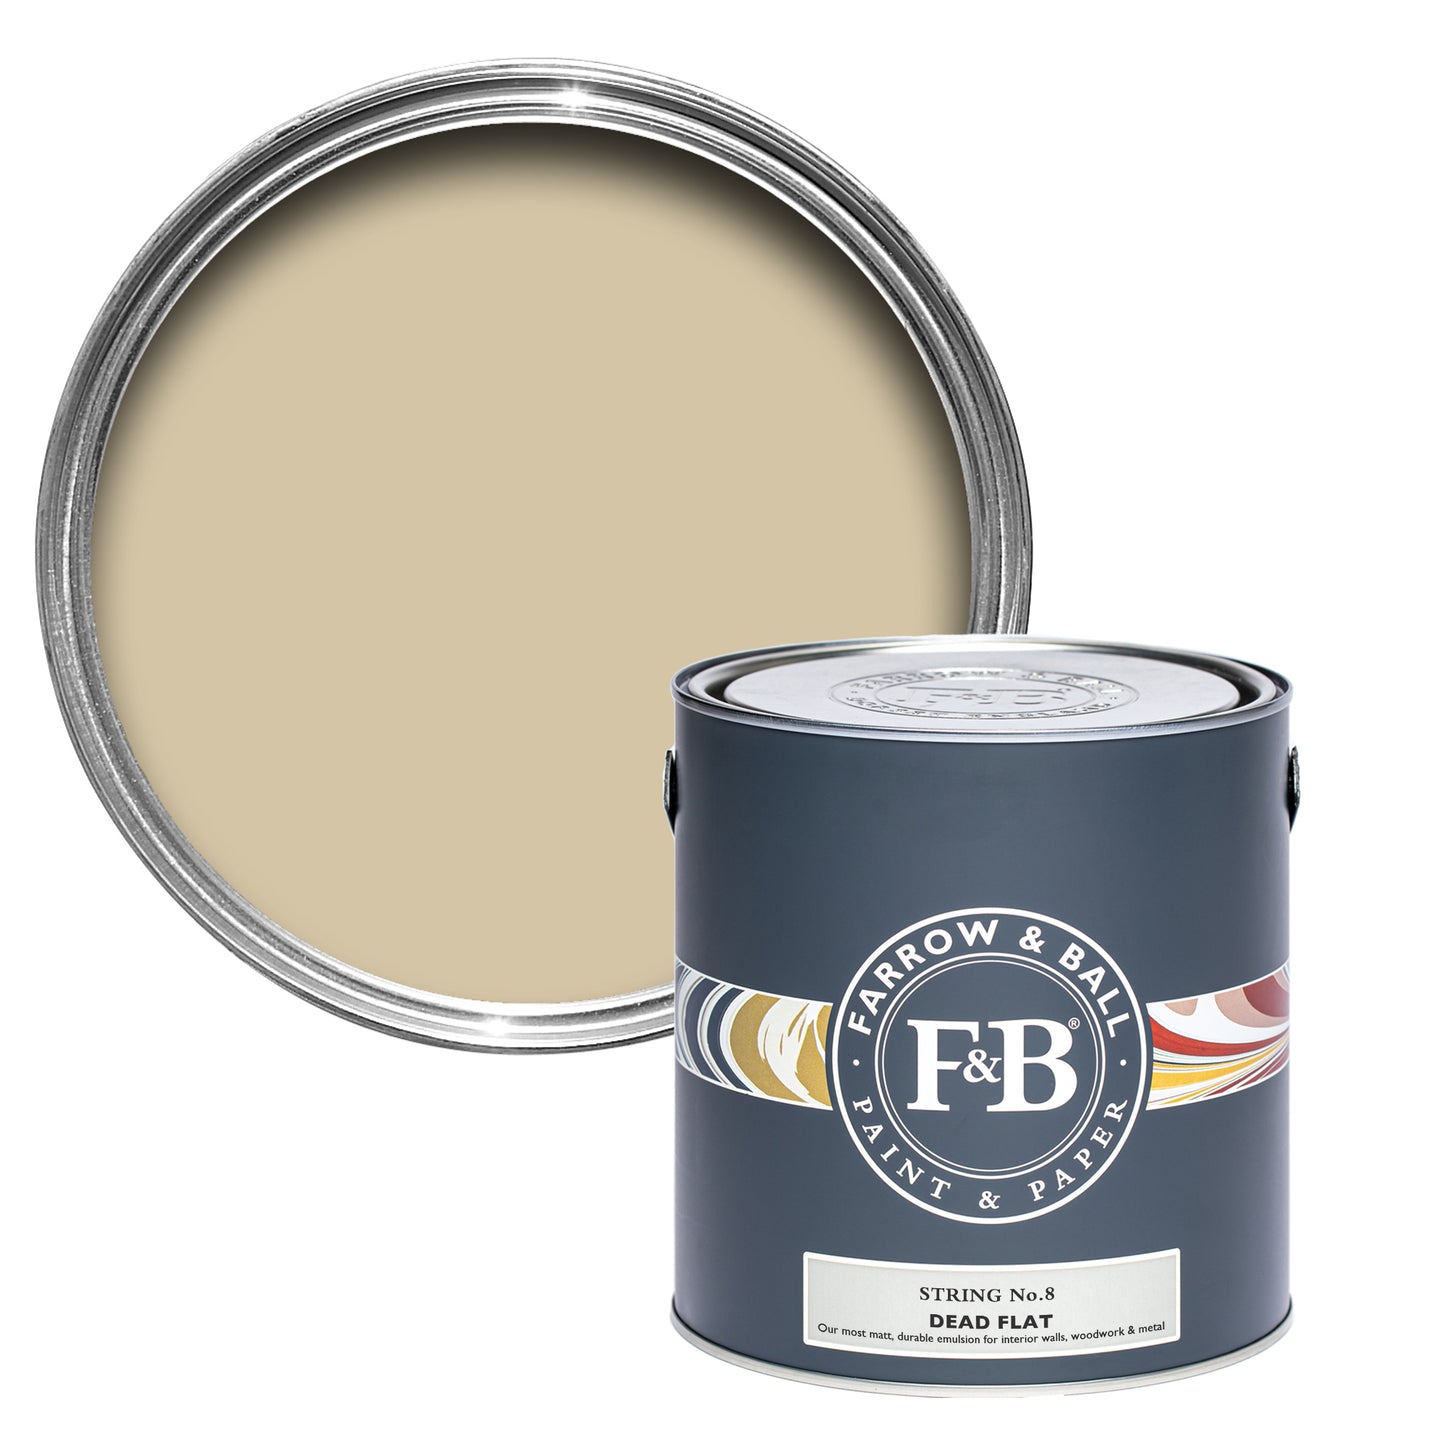 Dead Flat - Farrow and Ball - String 8 - Allround